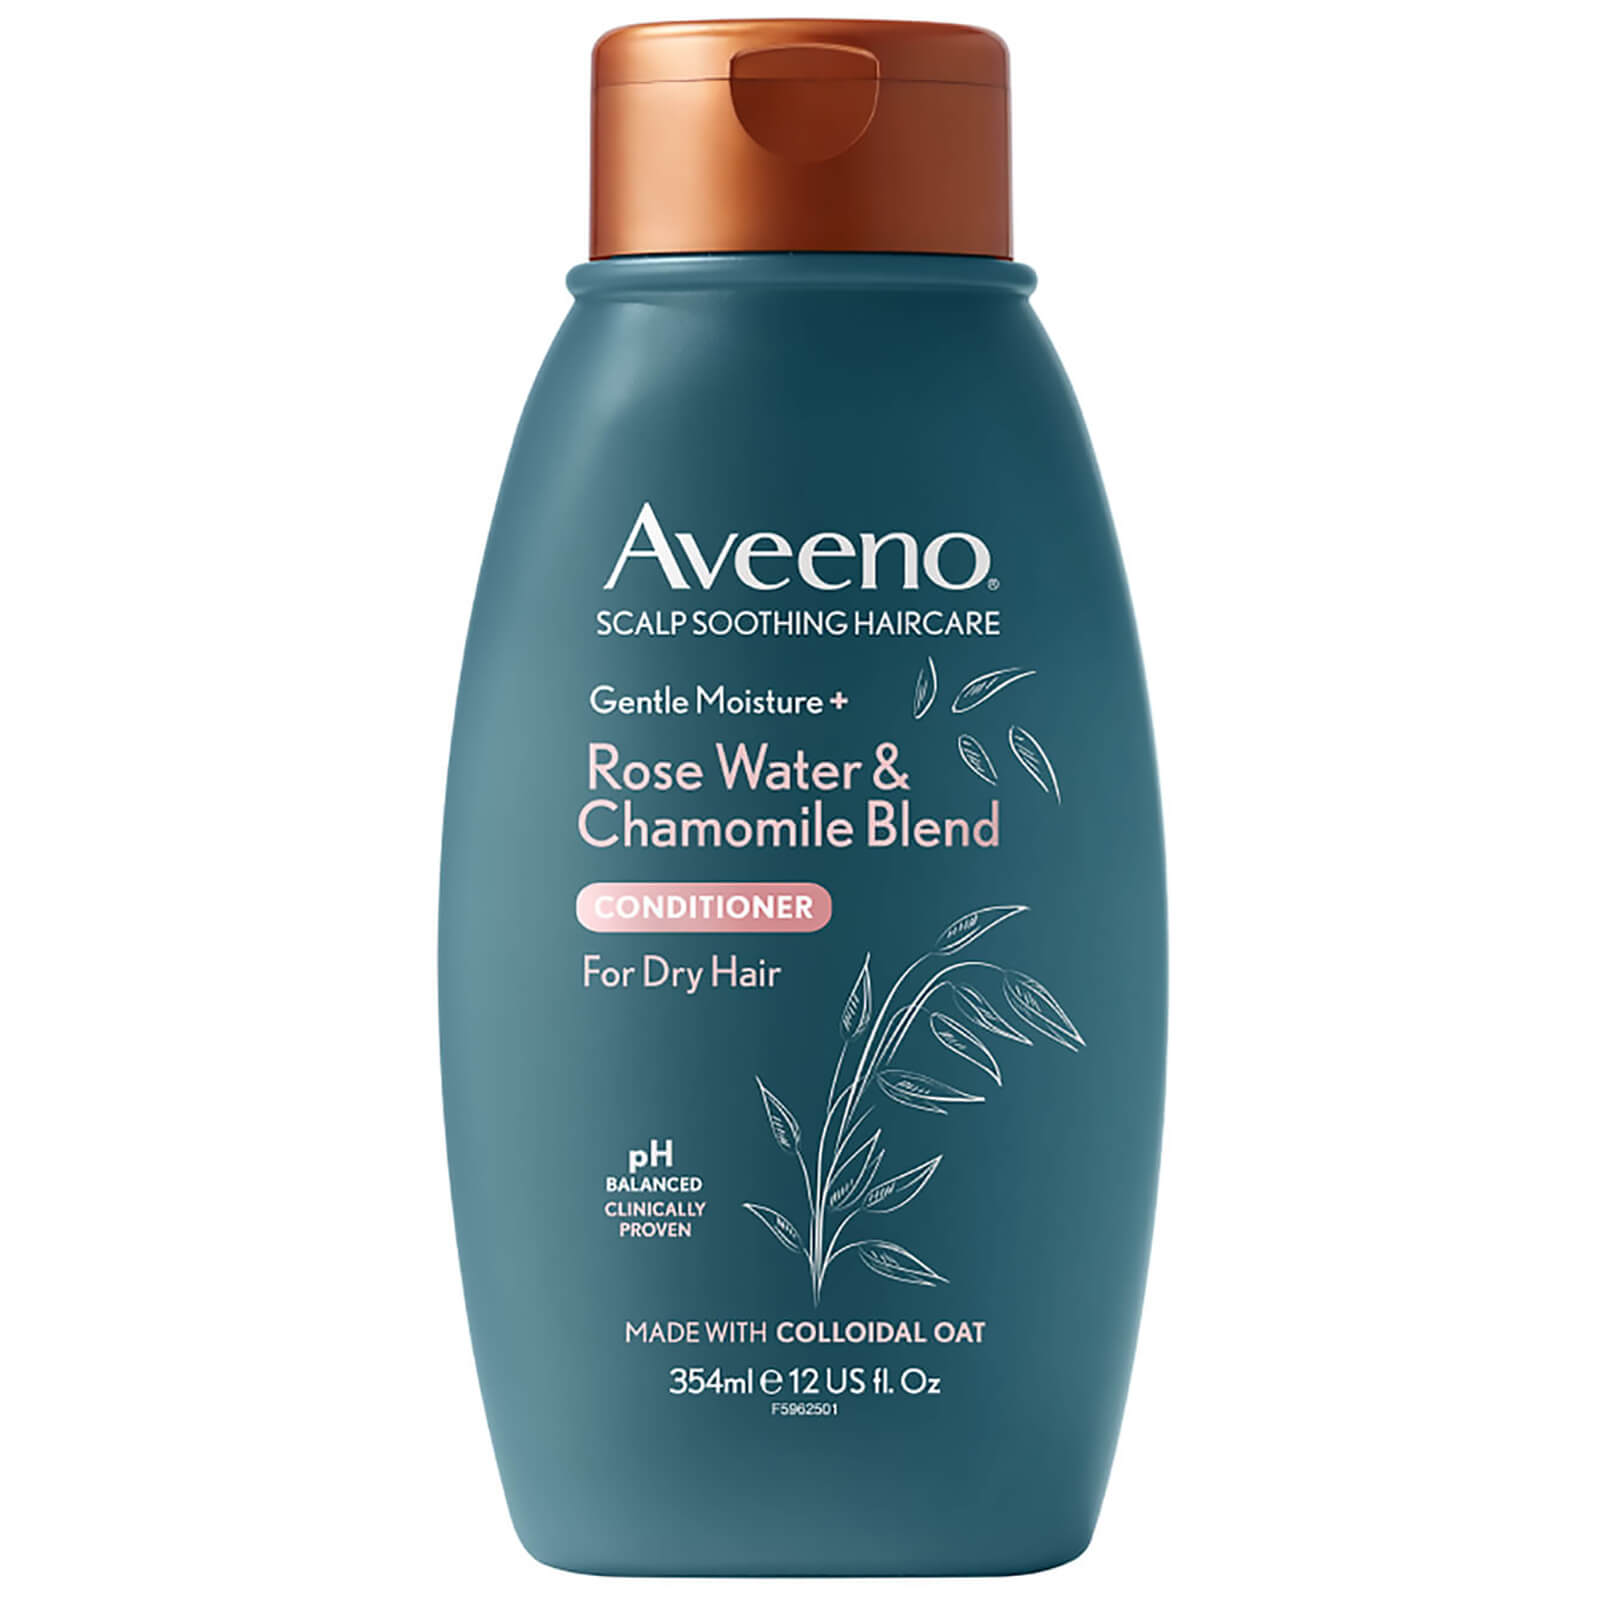 Photos - Hair Product Aveeno Scalp Soothing Haircare Gentle Moisture Rosewater and Chamomile Con 